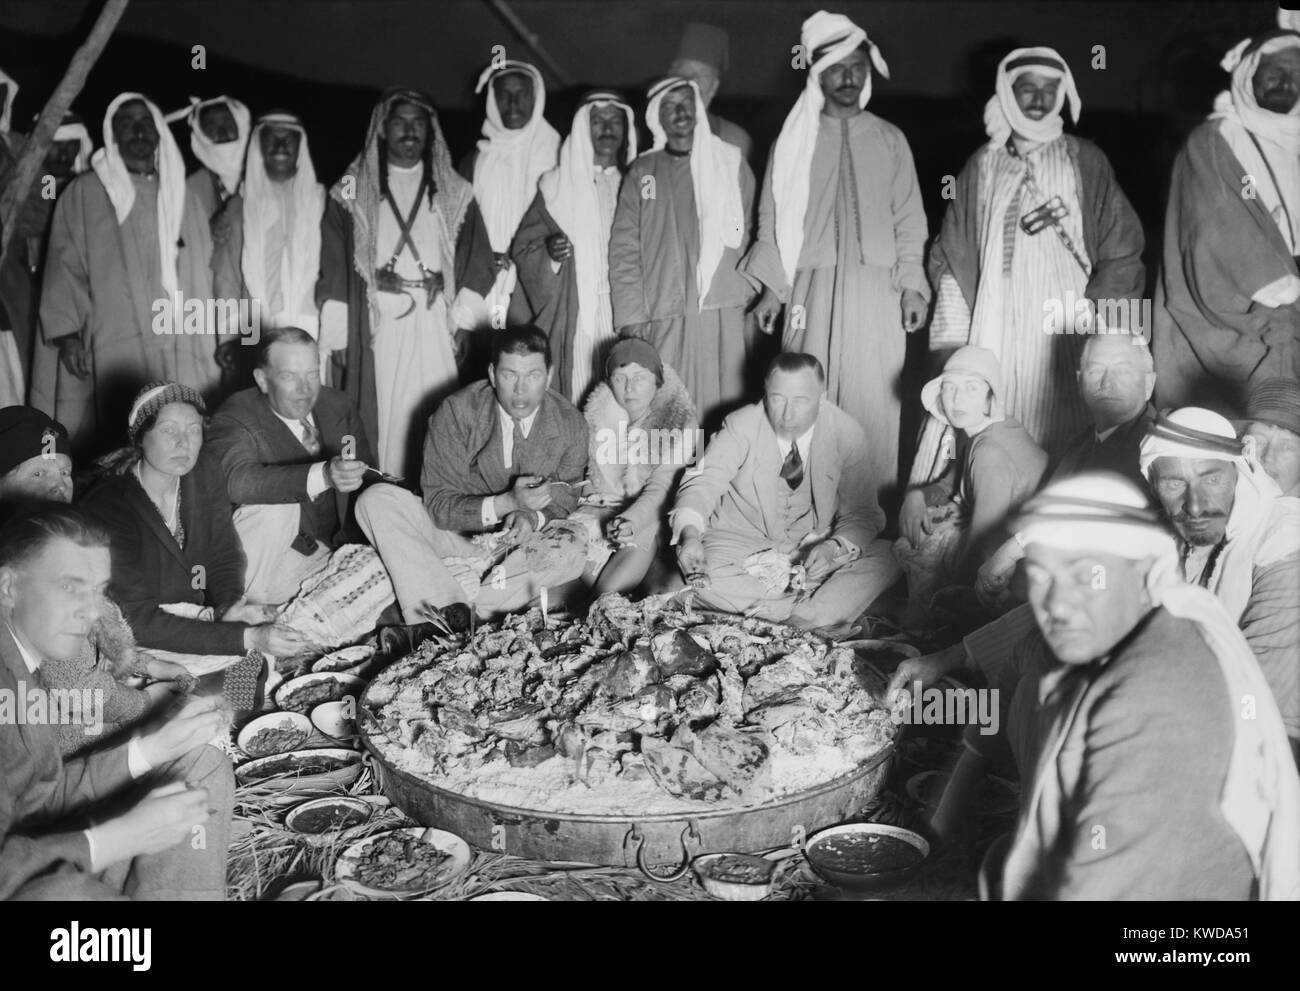 Gene Tunney and wife Polly Lauder Tunney at Bedouin camp with Sheik Majid, March 1931. The former heavy weight champion retired from boxing when the couple married in 1928. (BSLOC 2015 17 79) Stock Photo